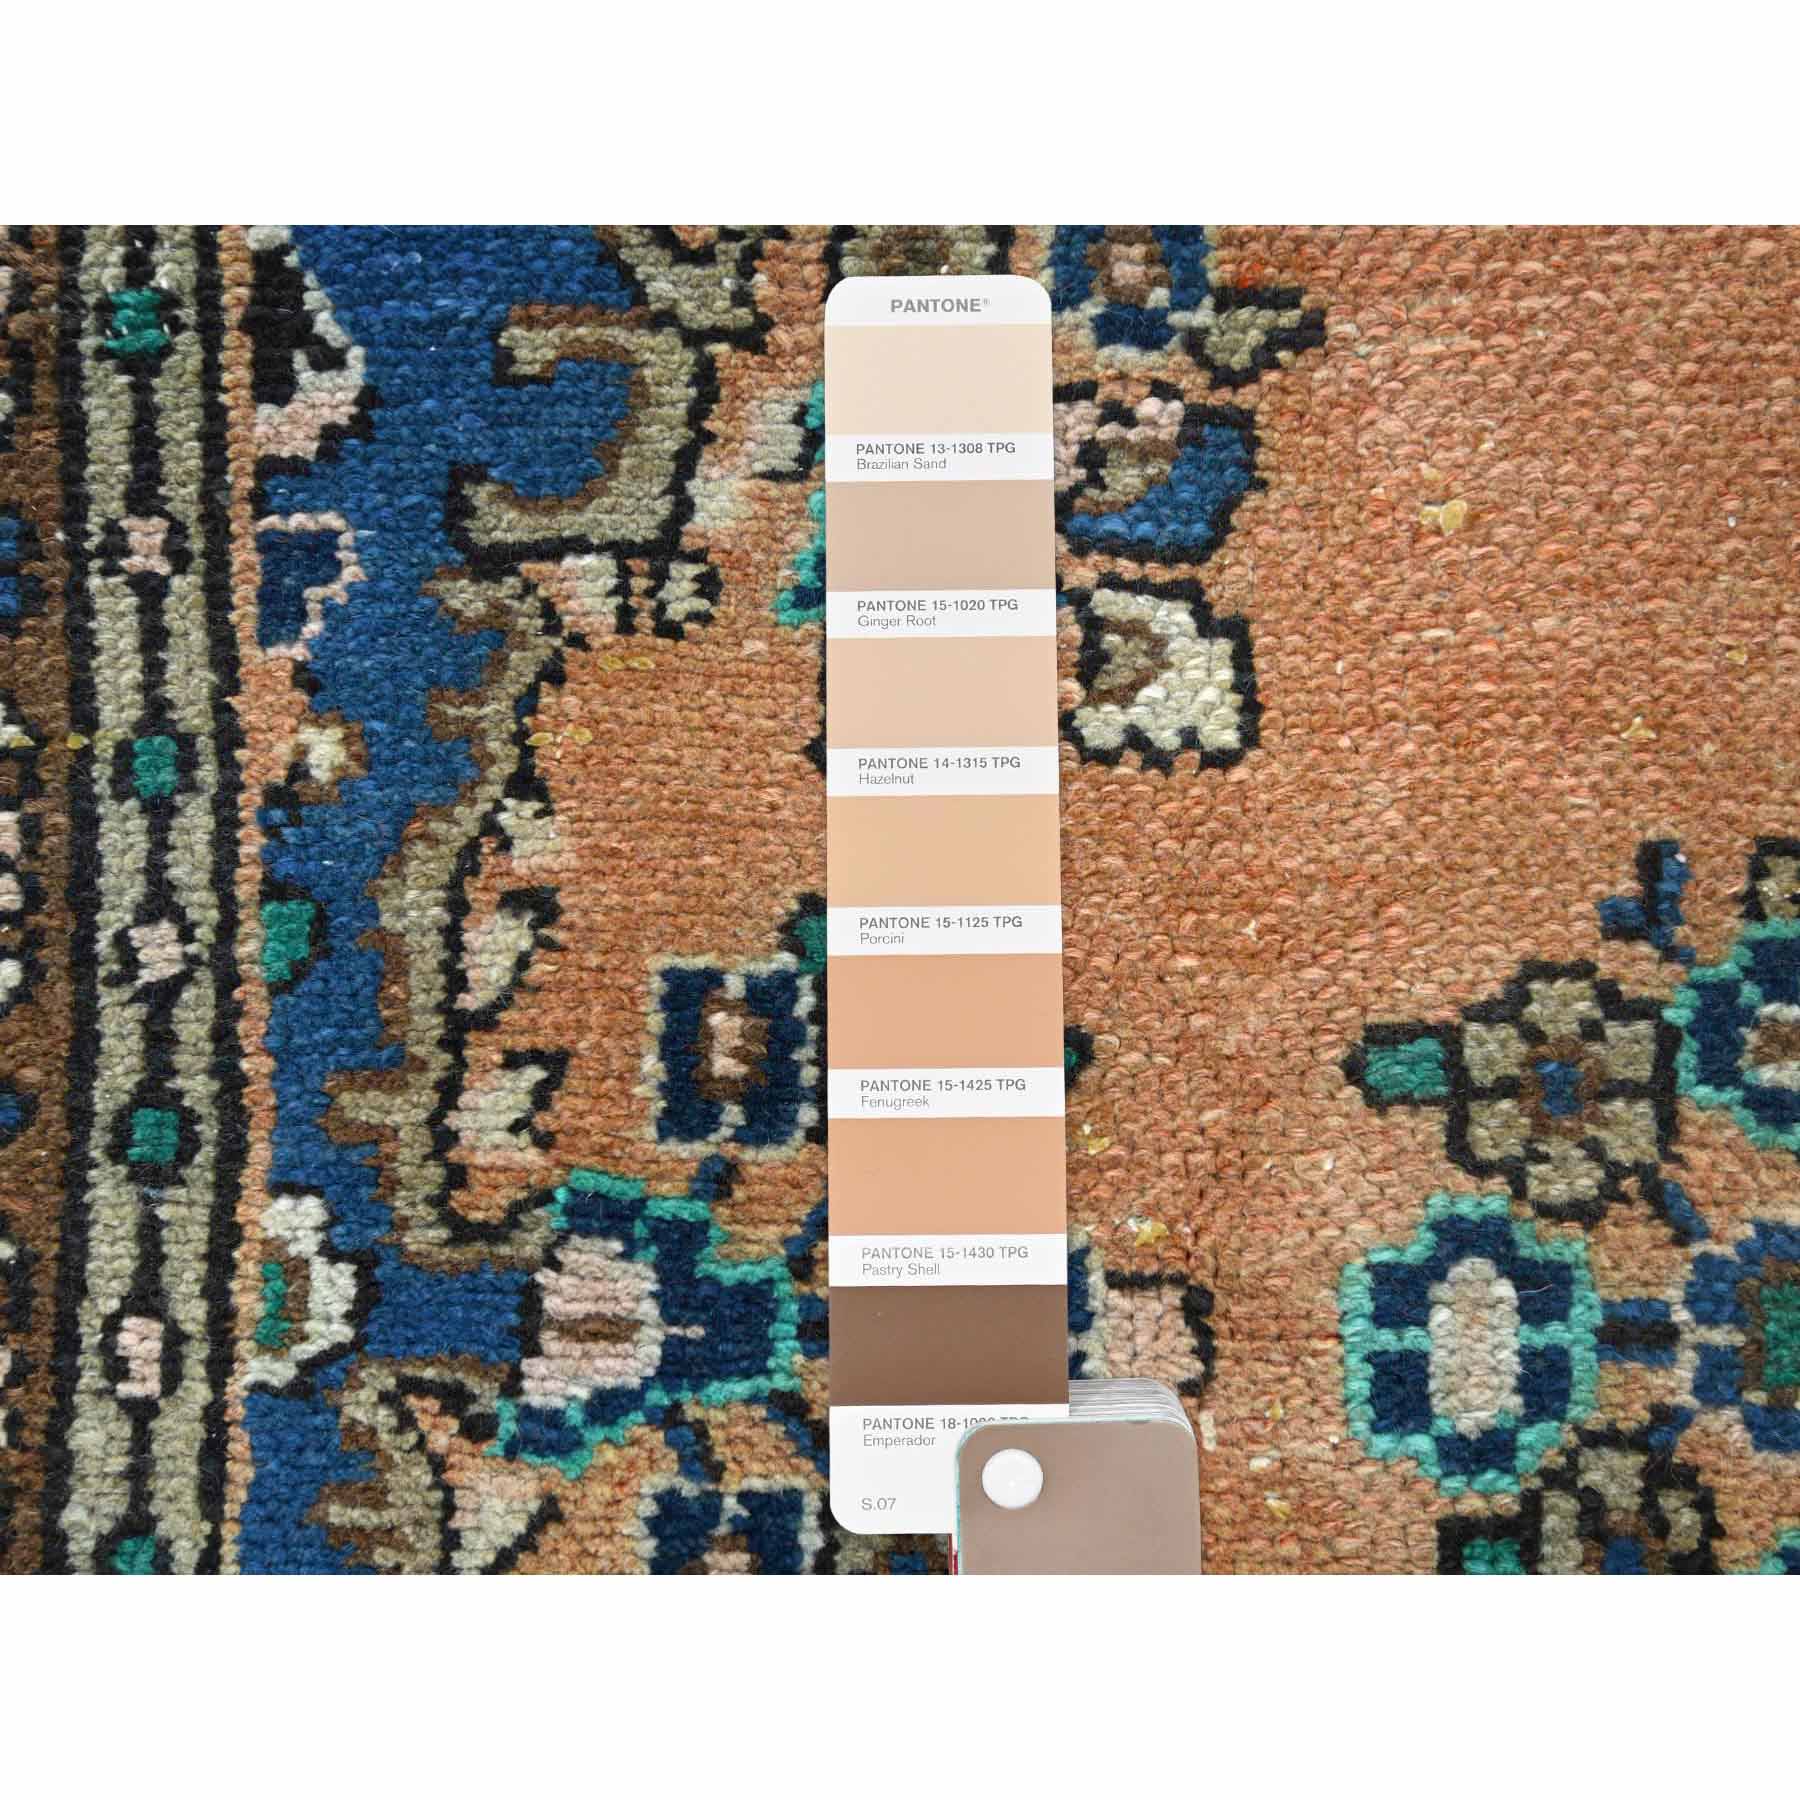 Overdyed-Vintage-Hand-Knotted-Rug-405995